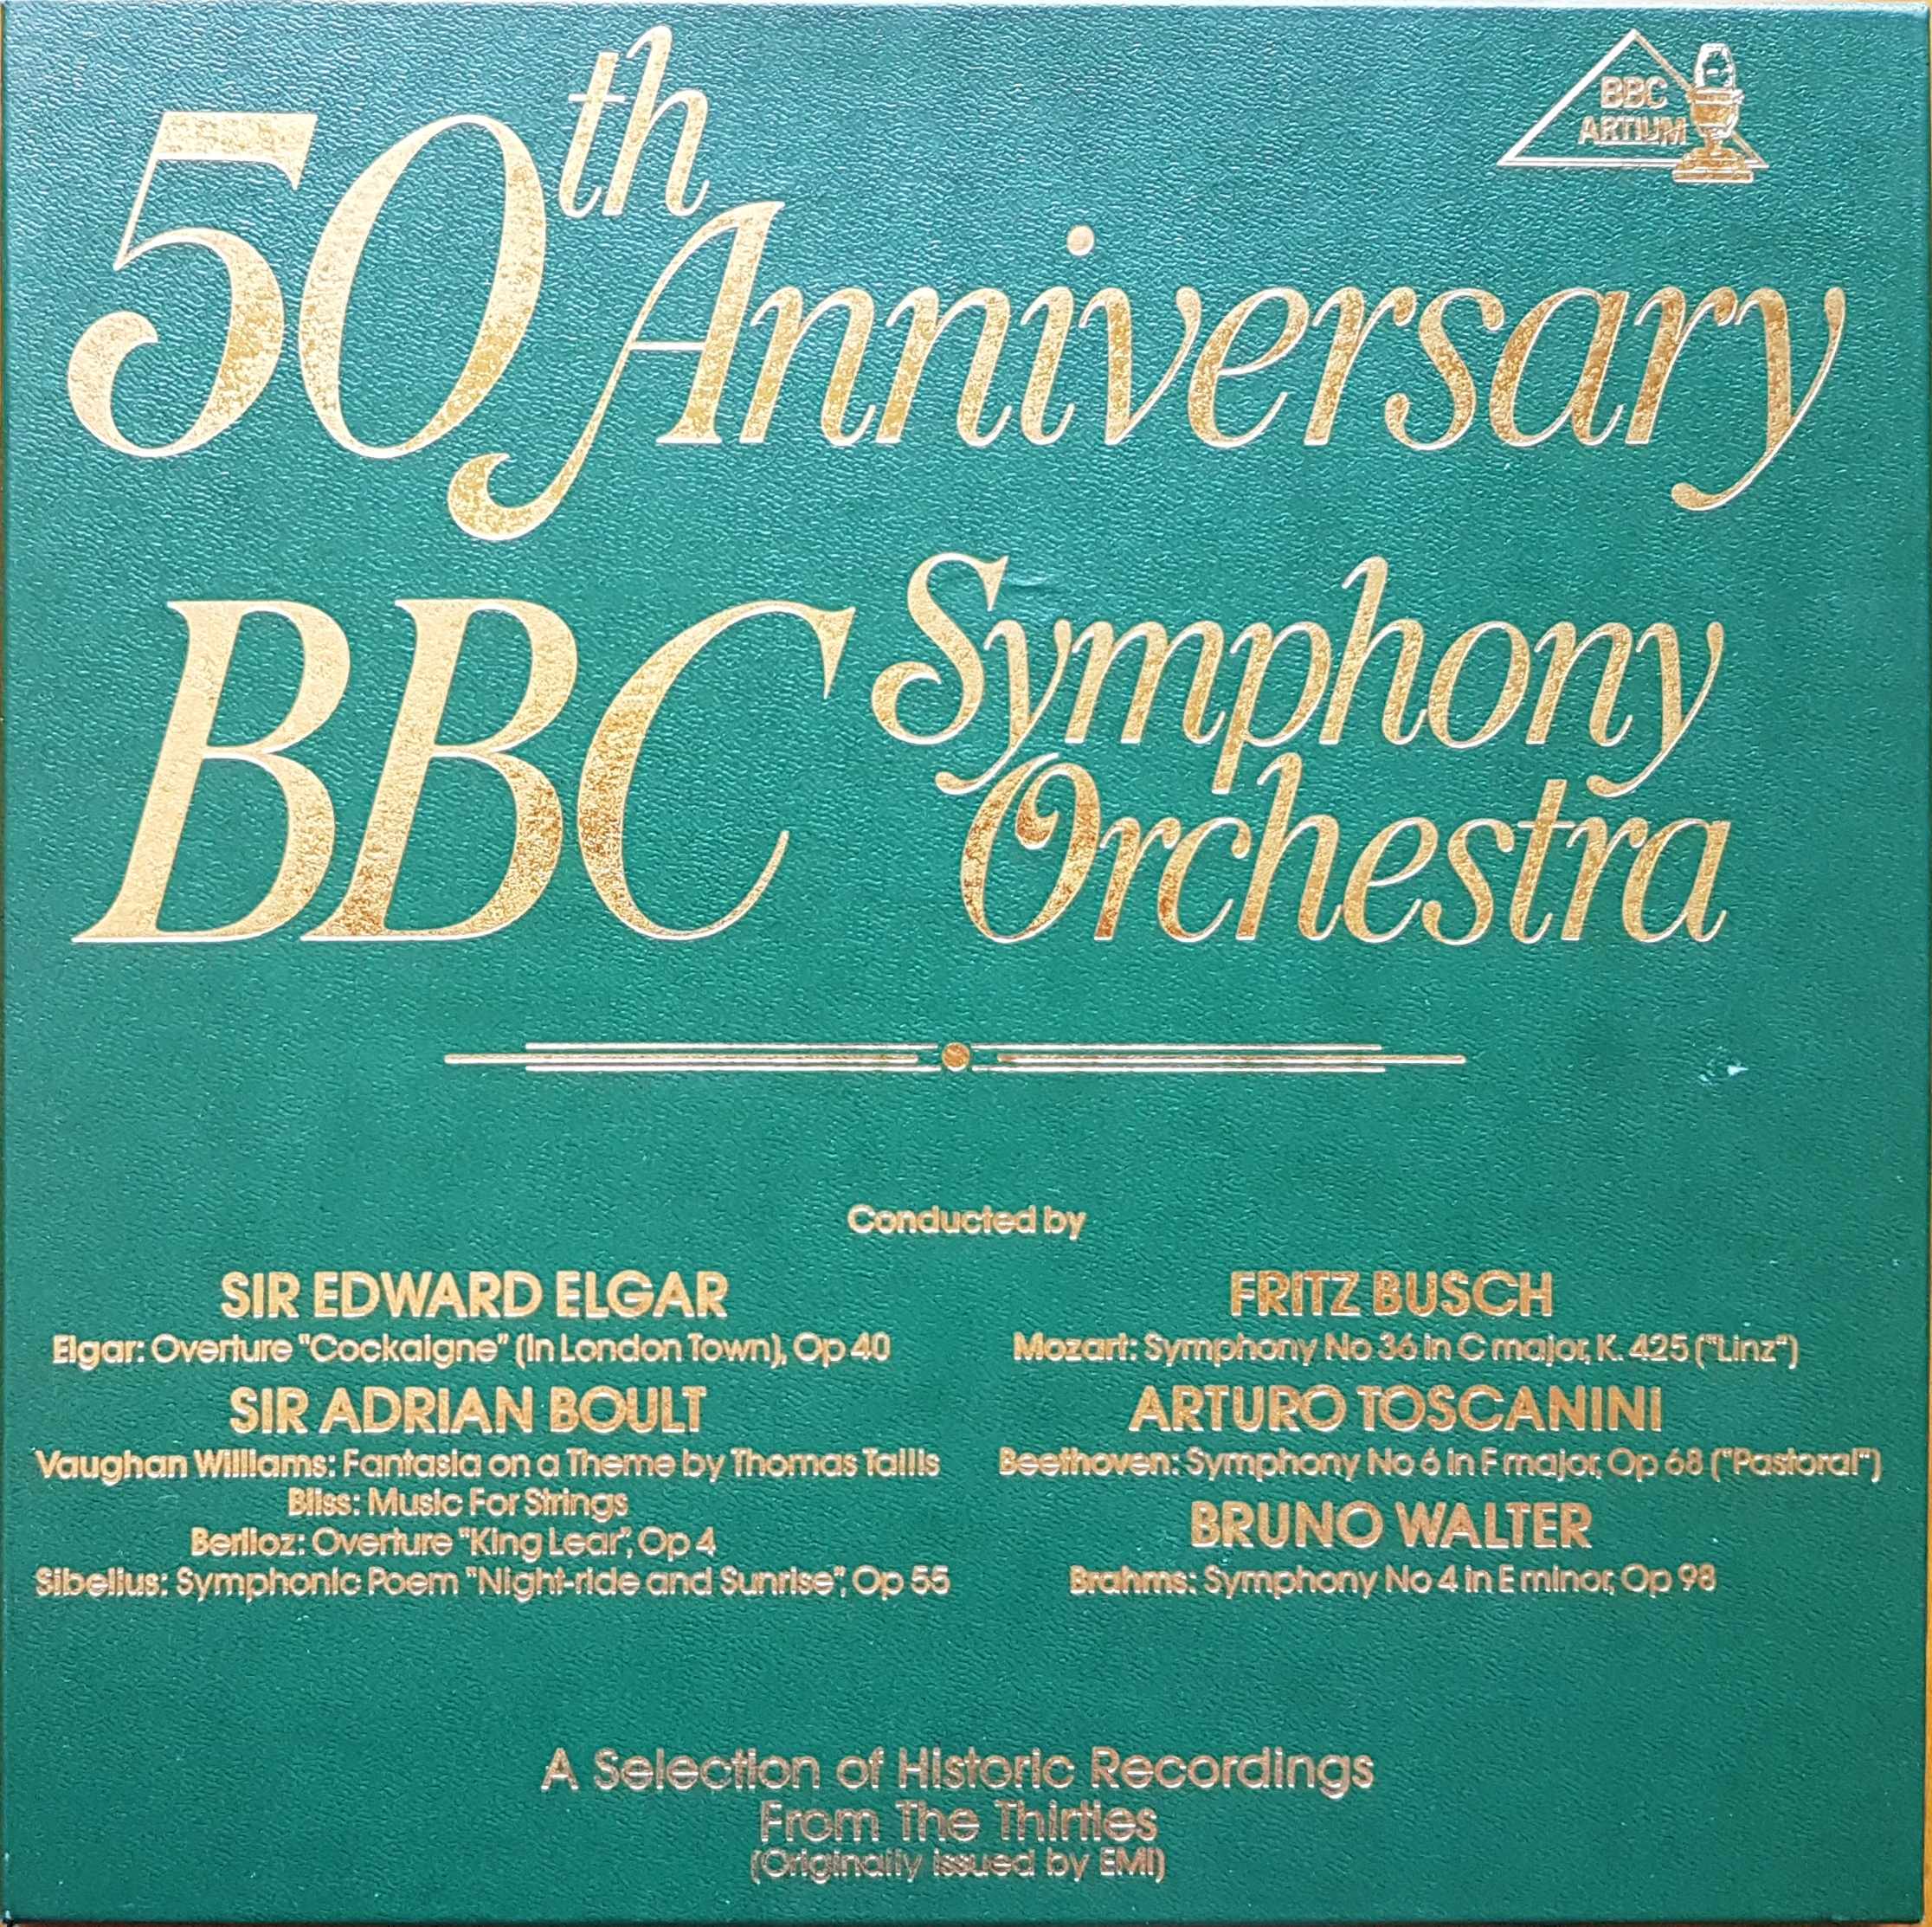 Picture of The BBC symphony orchestra 50th anniversary by artist Elgar / Vaughan Williams / Bliss / Berlioz / Sibelius / Mozart / Brahms / Beethoven from the BBC albums - Records and Tapes library